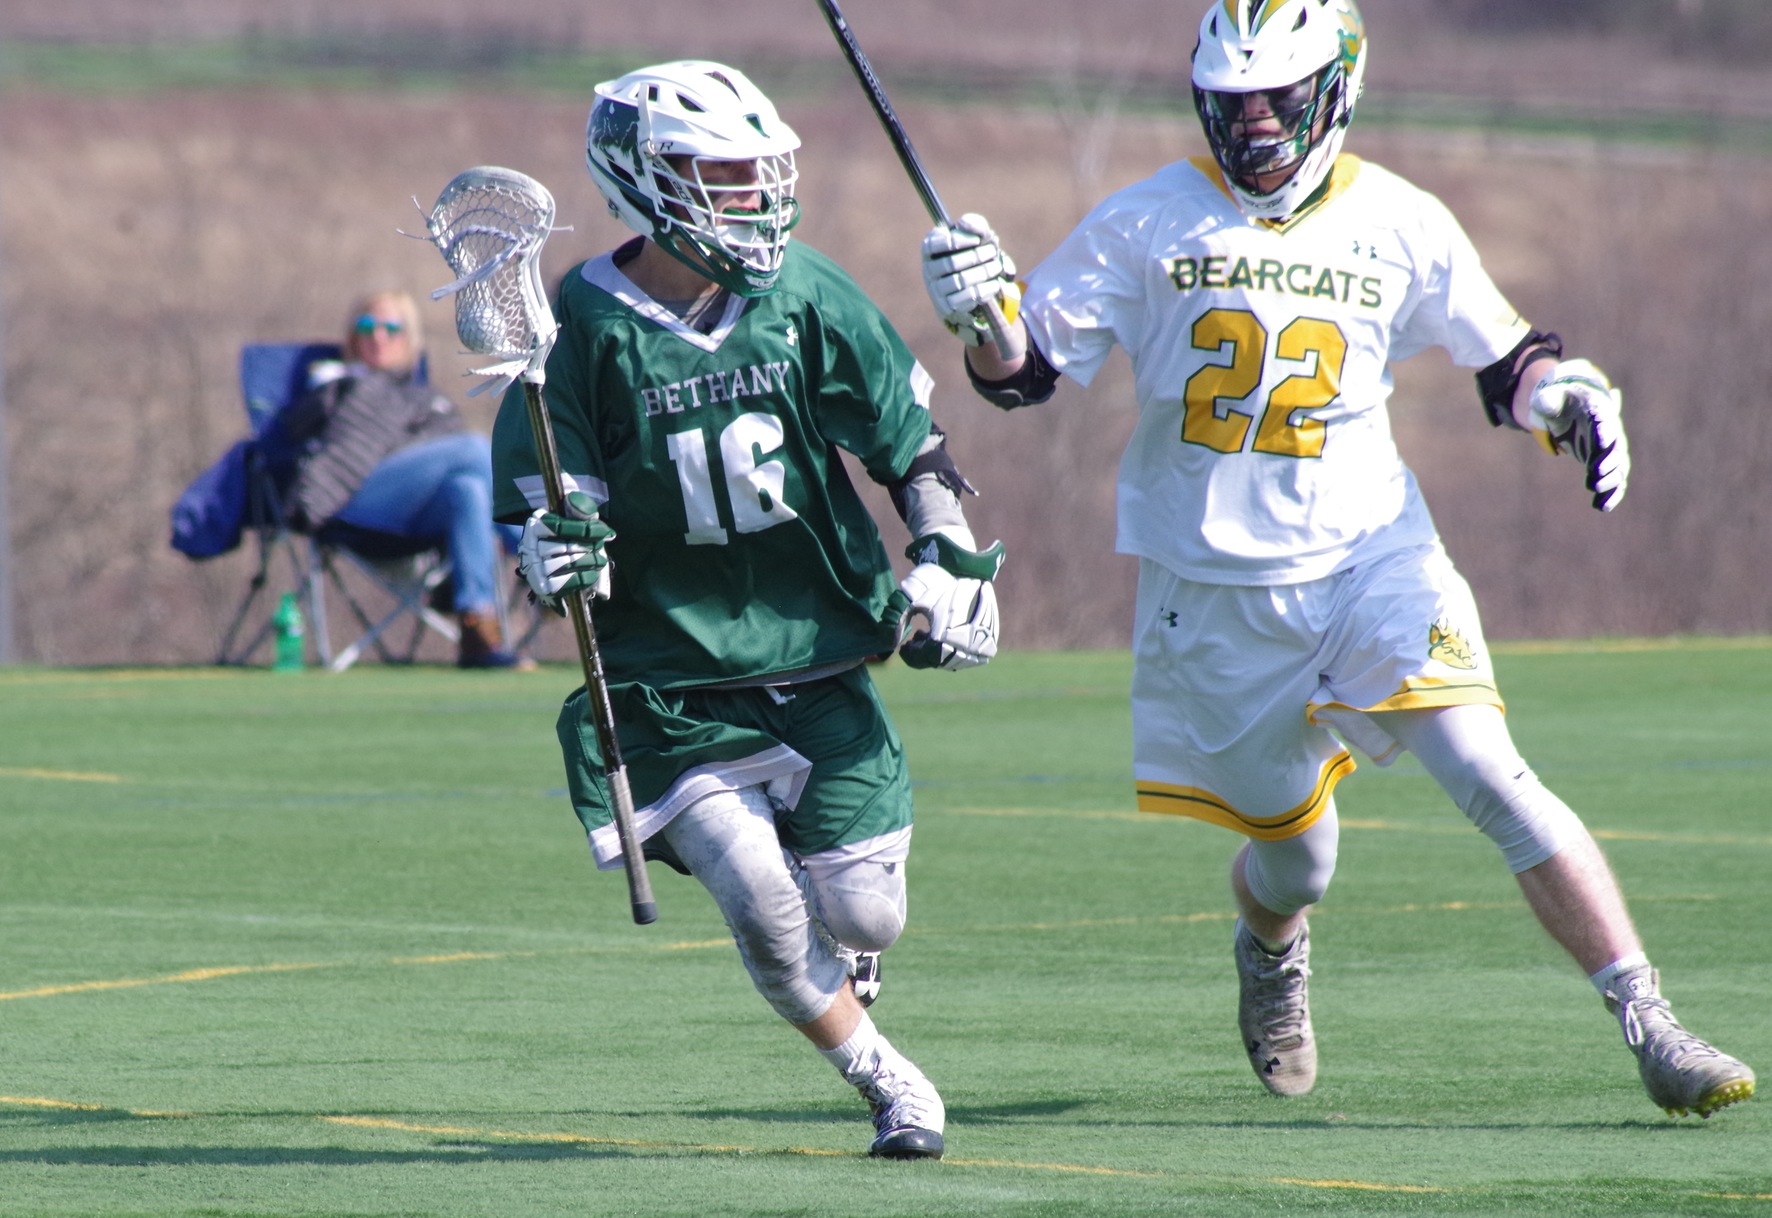 Bethany upended at Saint Vincent